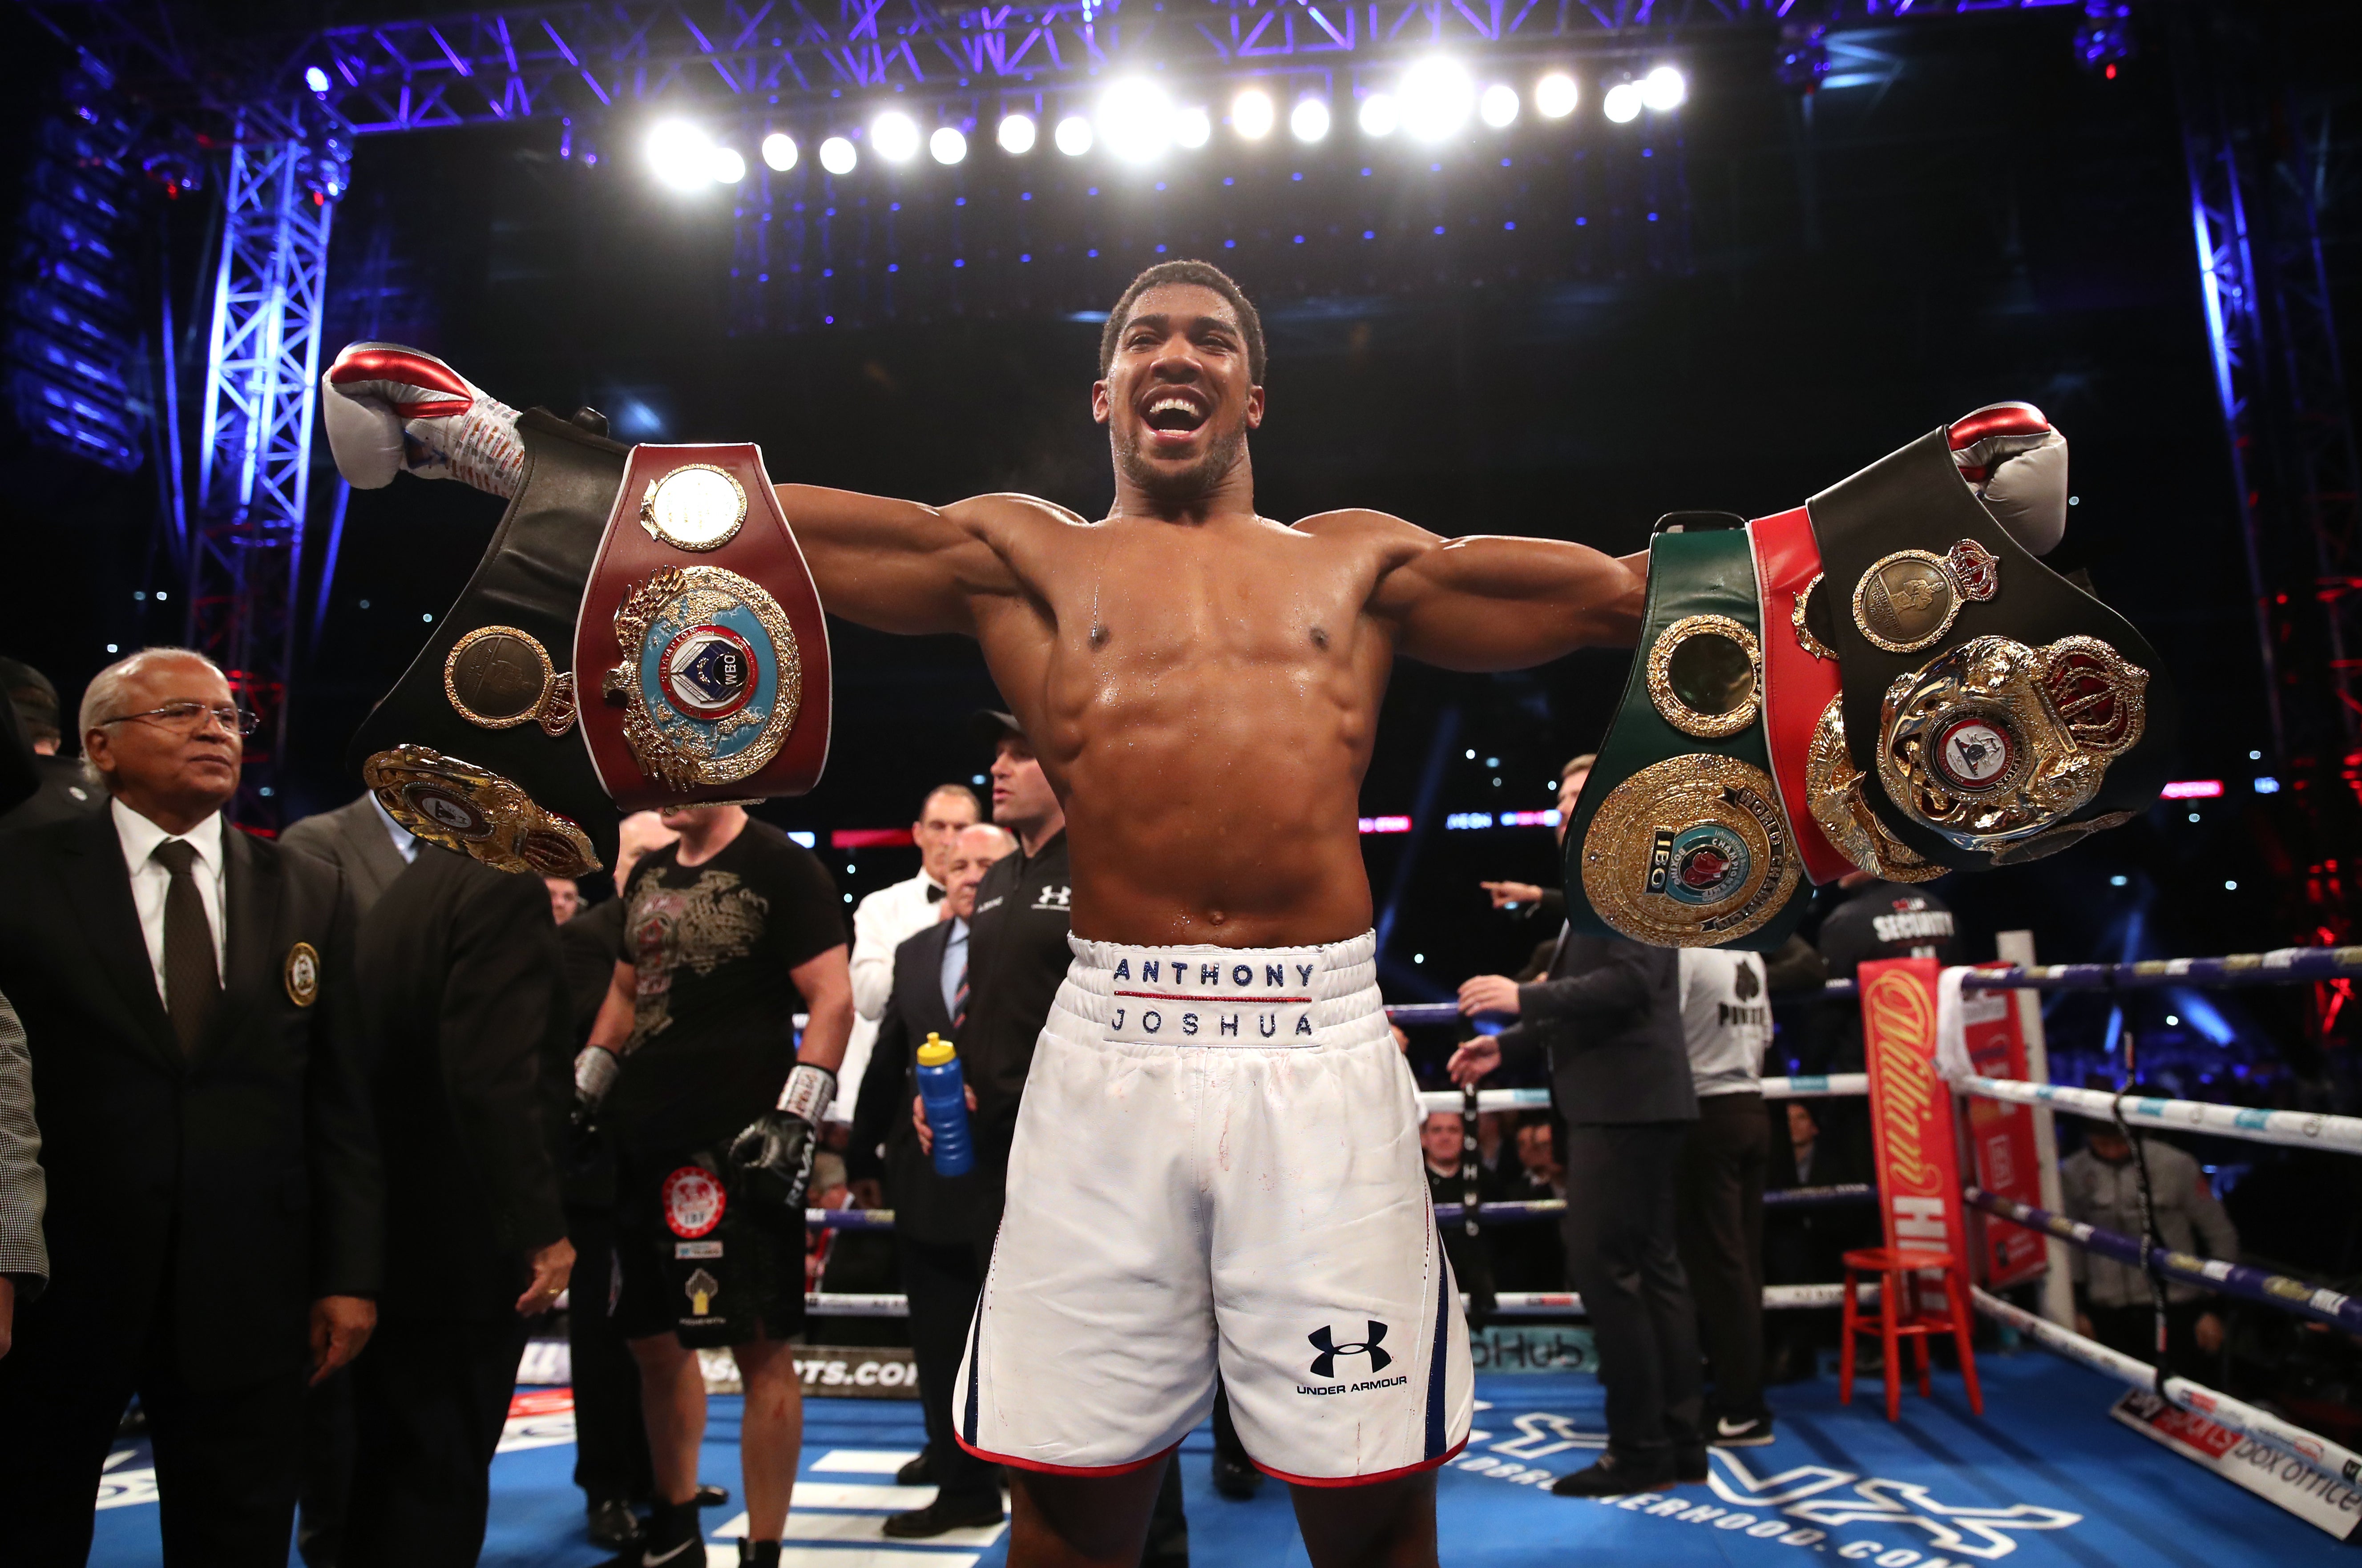 Anthony Joshua, pictured, claimed his 22nd consecutive victory with a seventh-round victory over Alexander Povetkin (Nick Potts/PA)